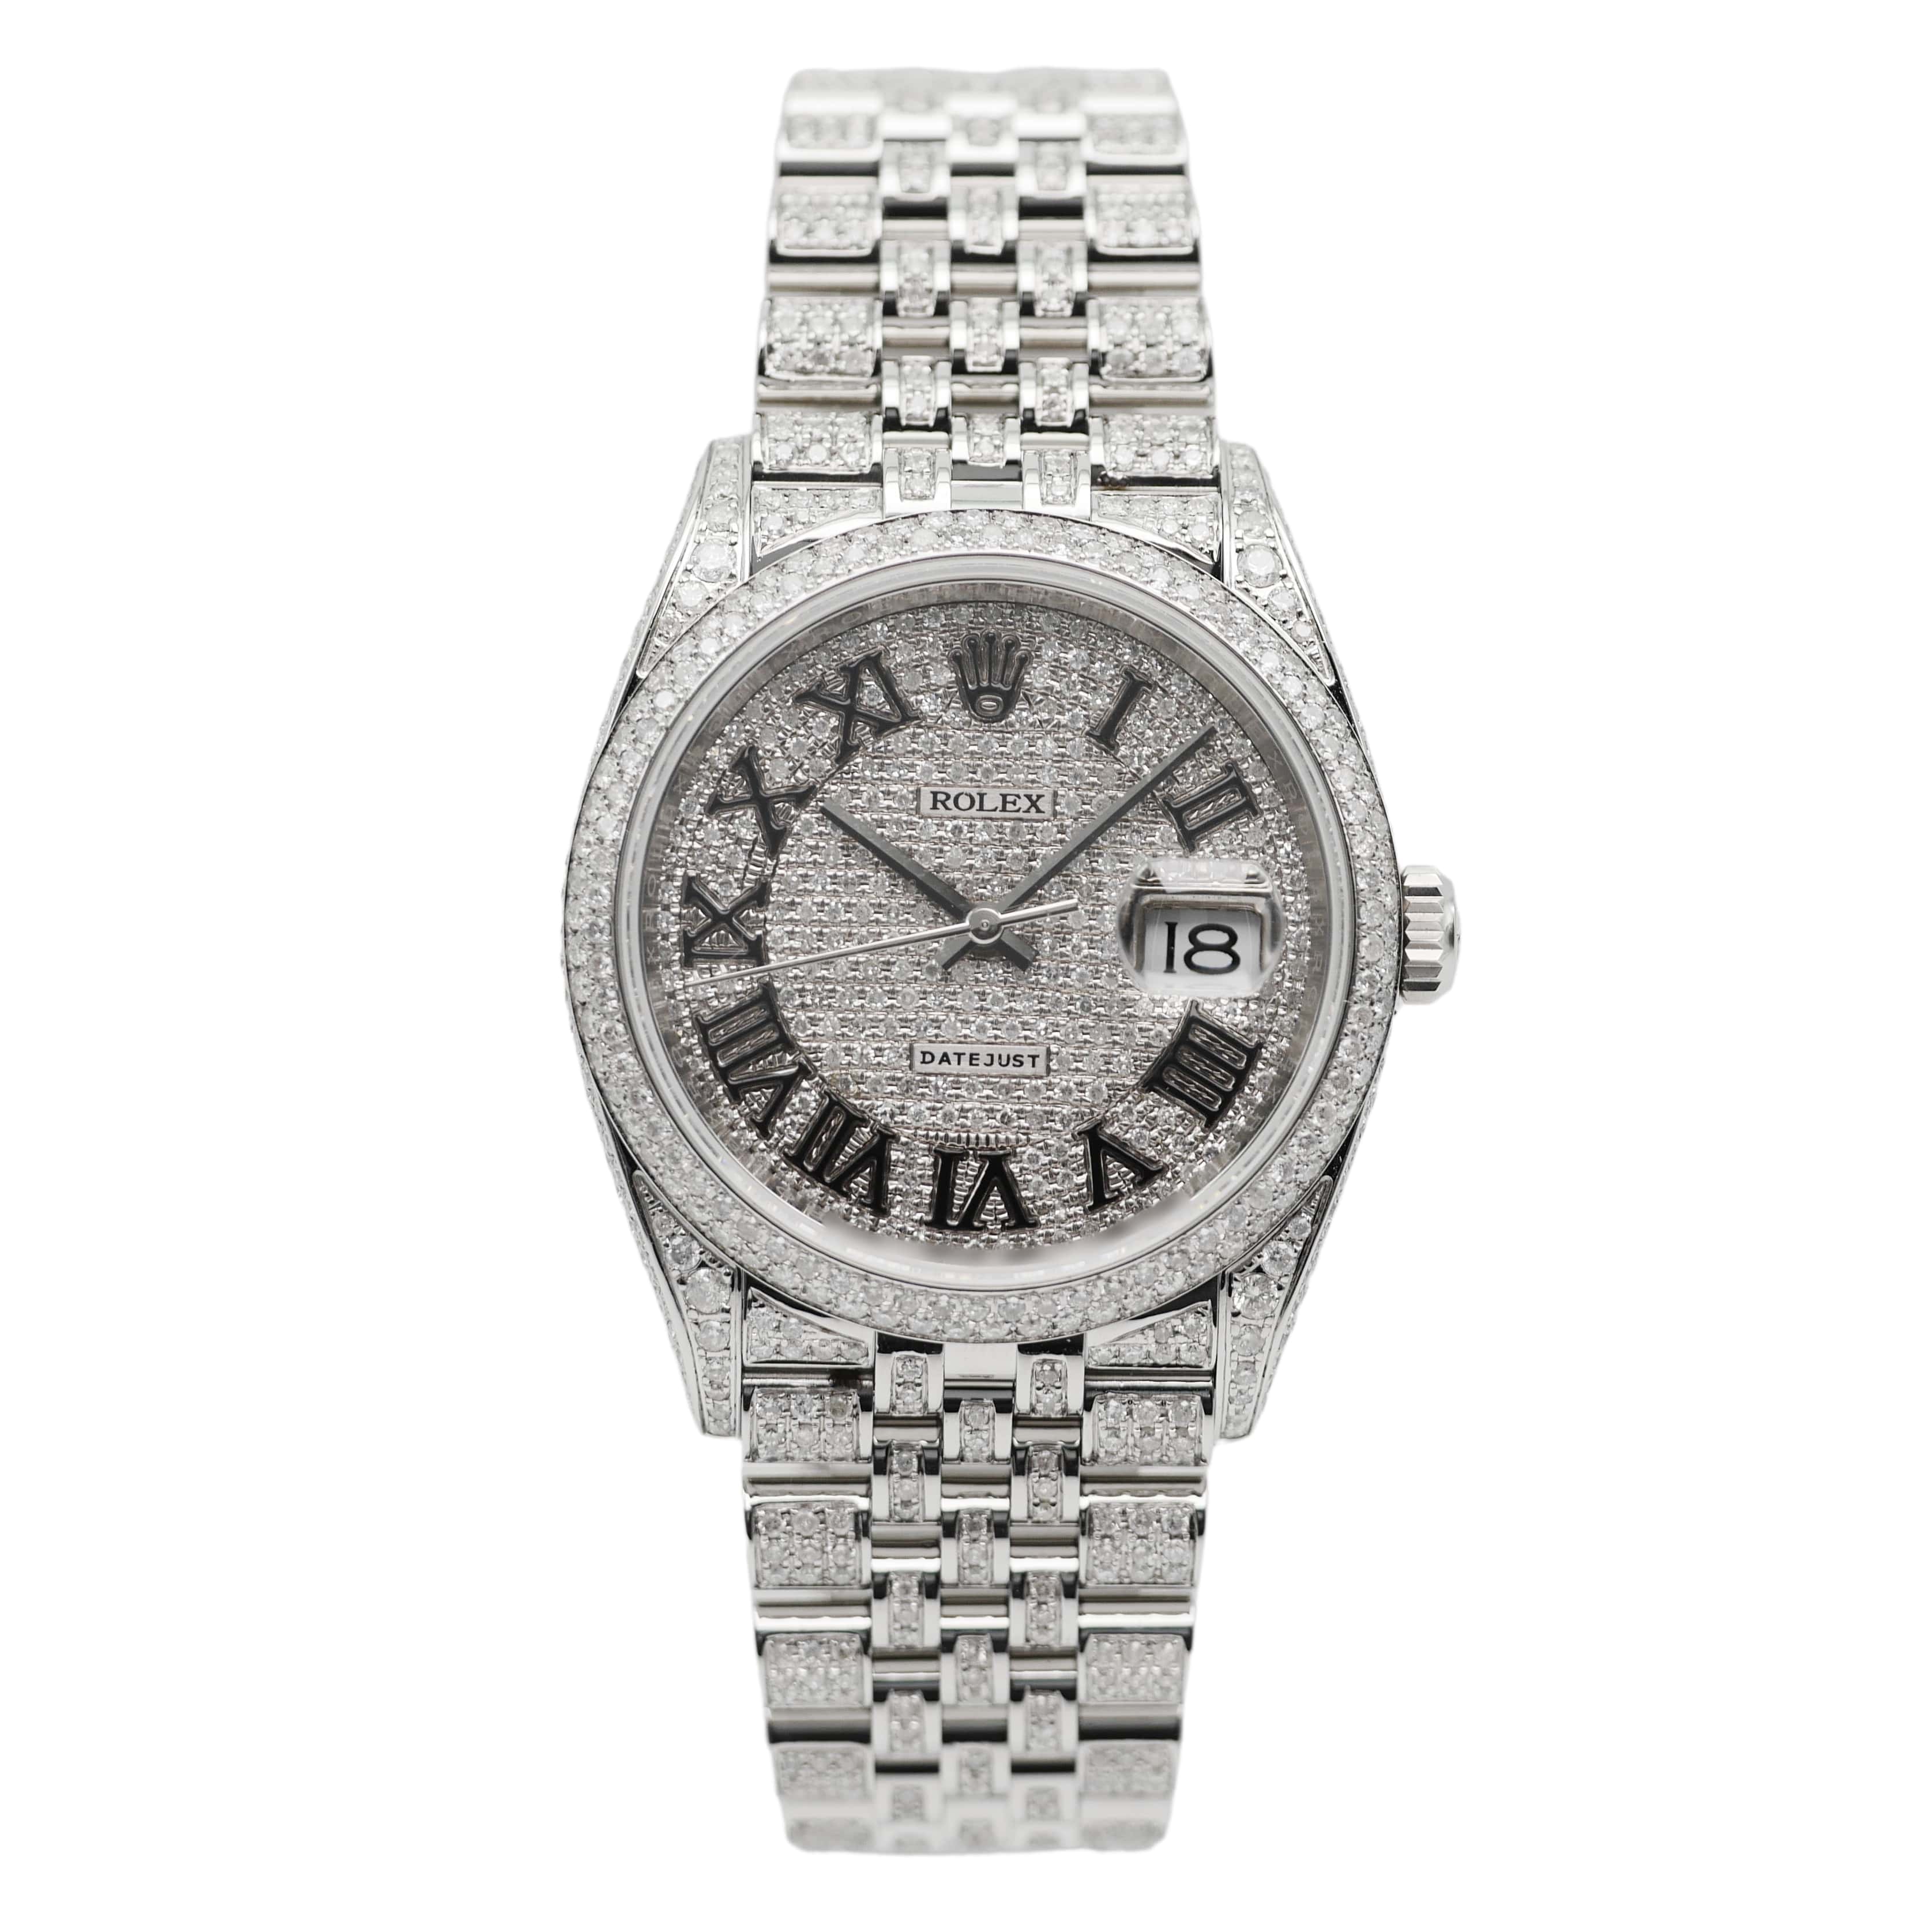 ROLEX DATEJUST 36 STAHL / ICED OUT 